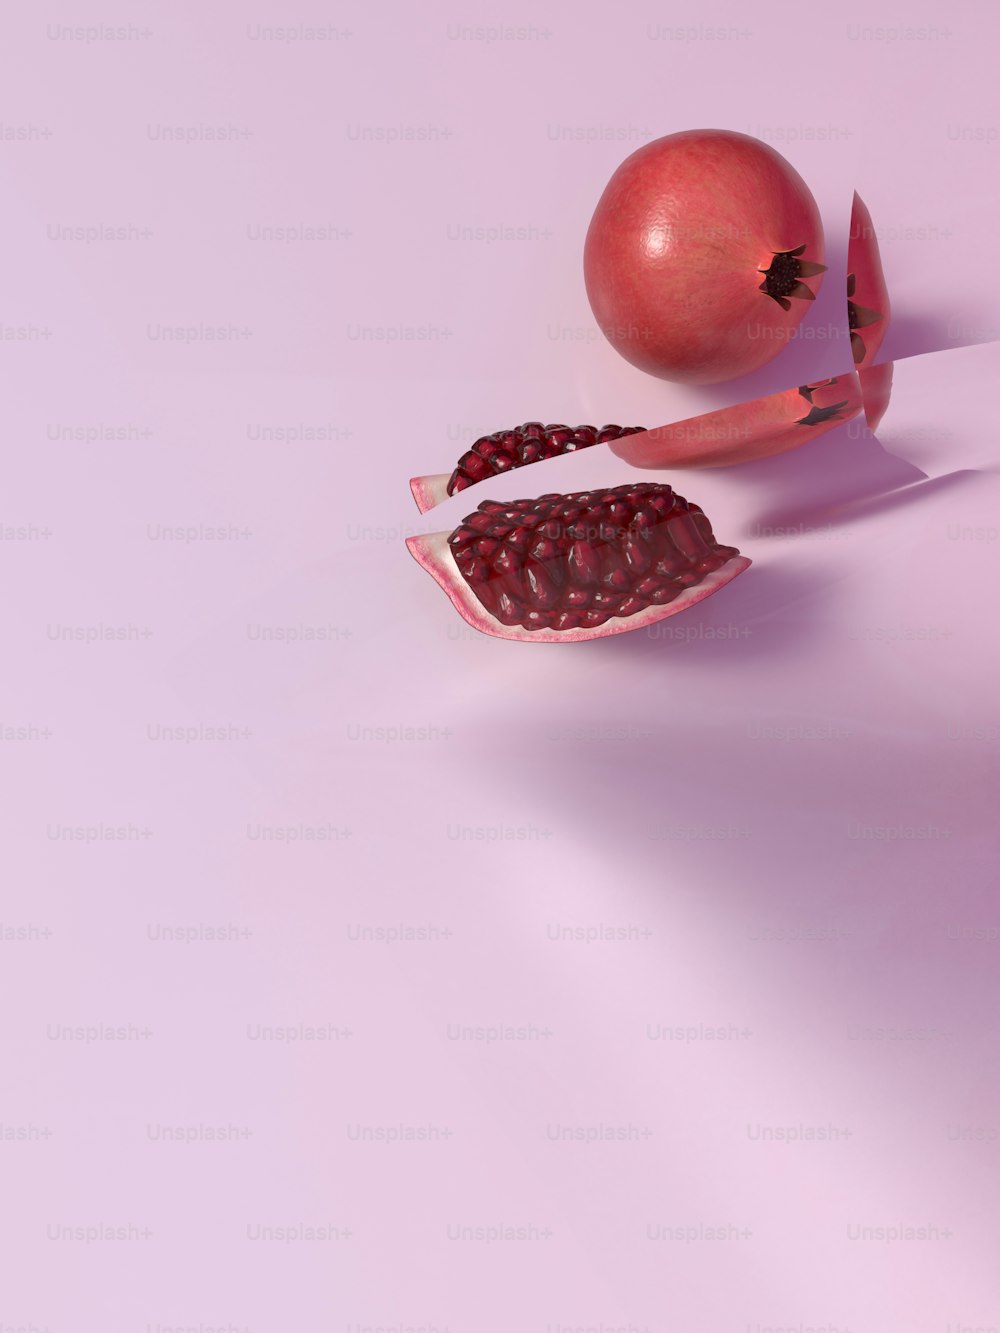 a pomegranate cut in half on a pink background